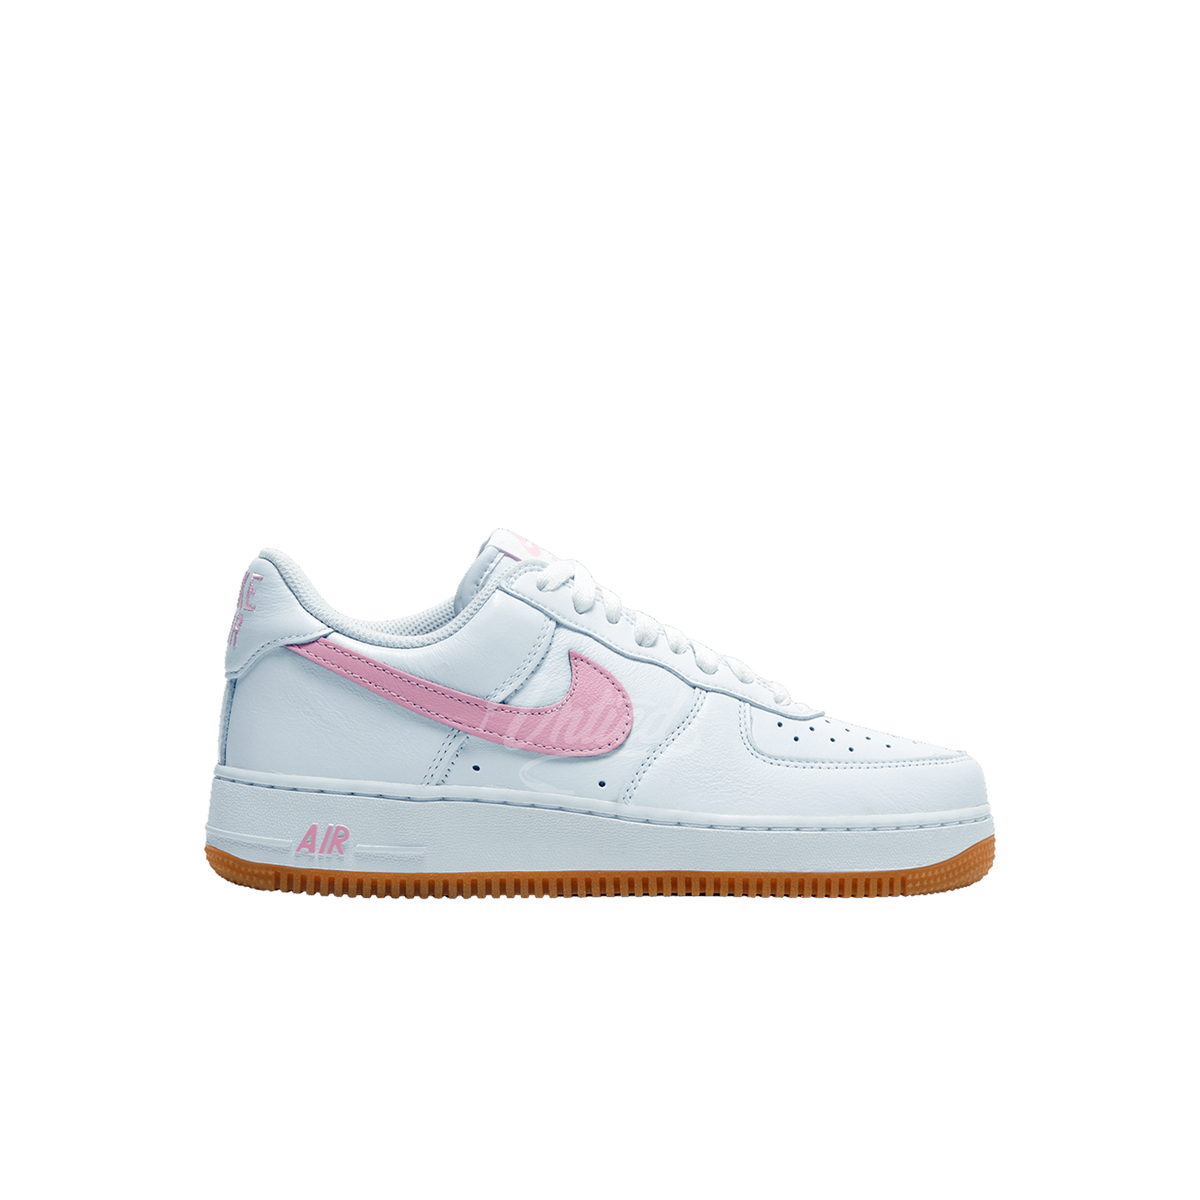 Air Force 1 Color of the Month "Pink Gum"